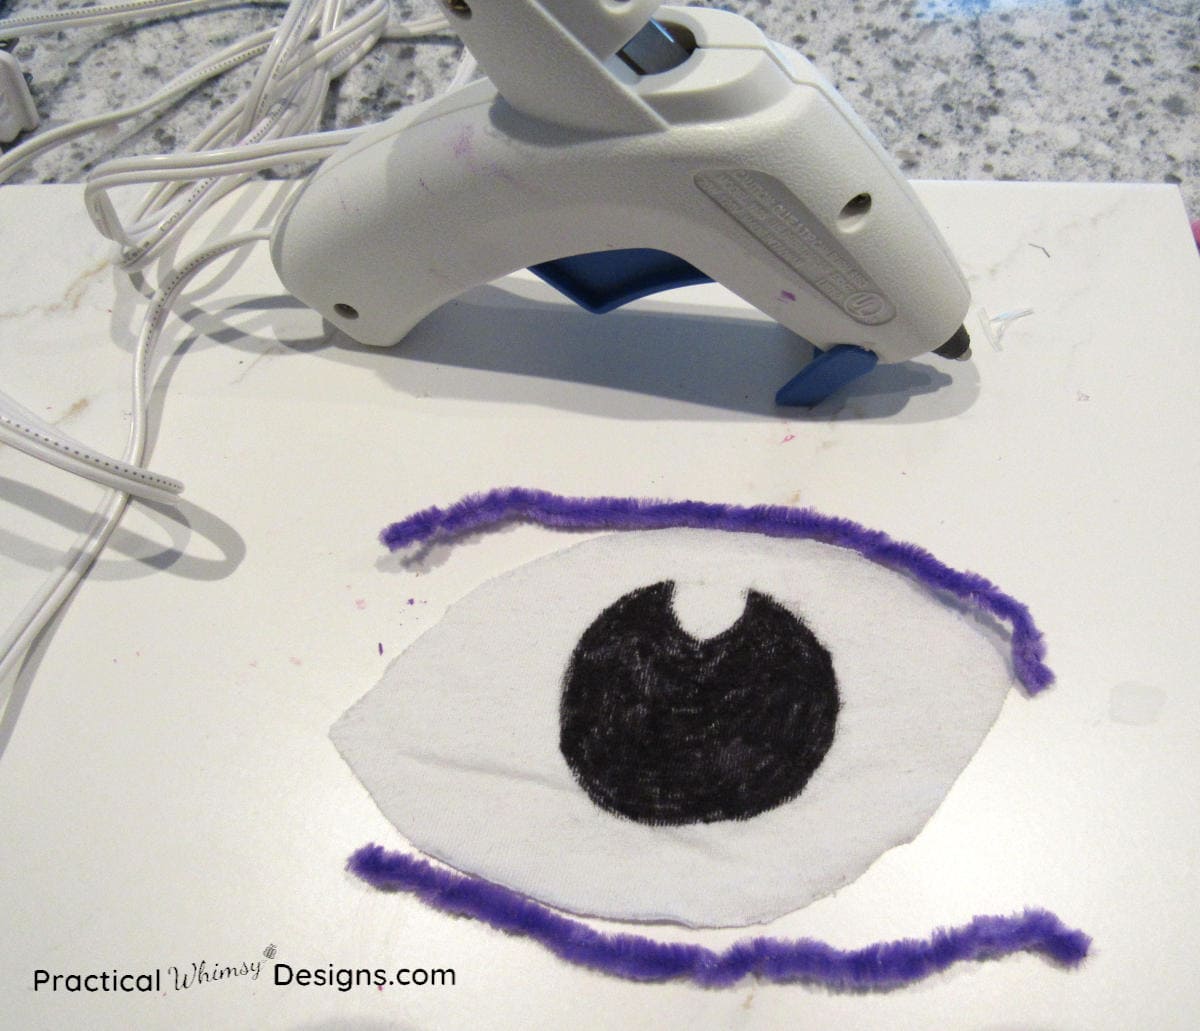 Gluing pipe cleaners on eye with hot glue gun